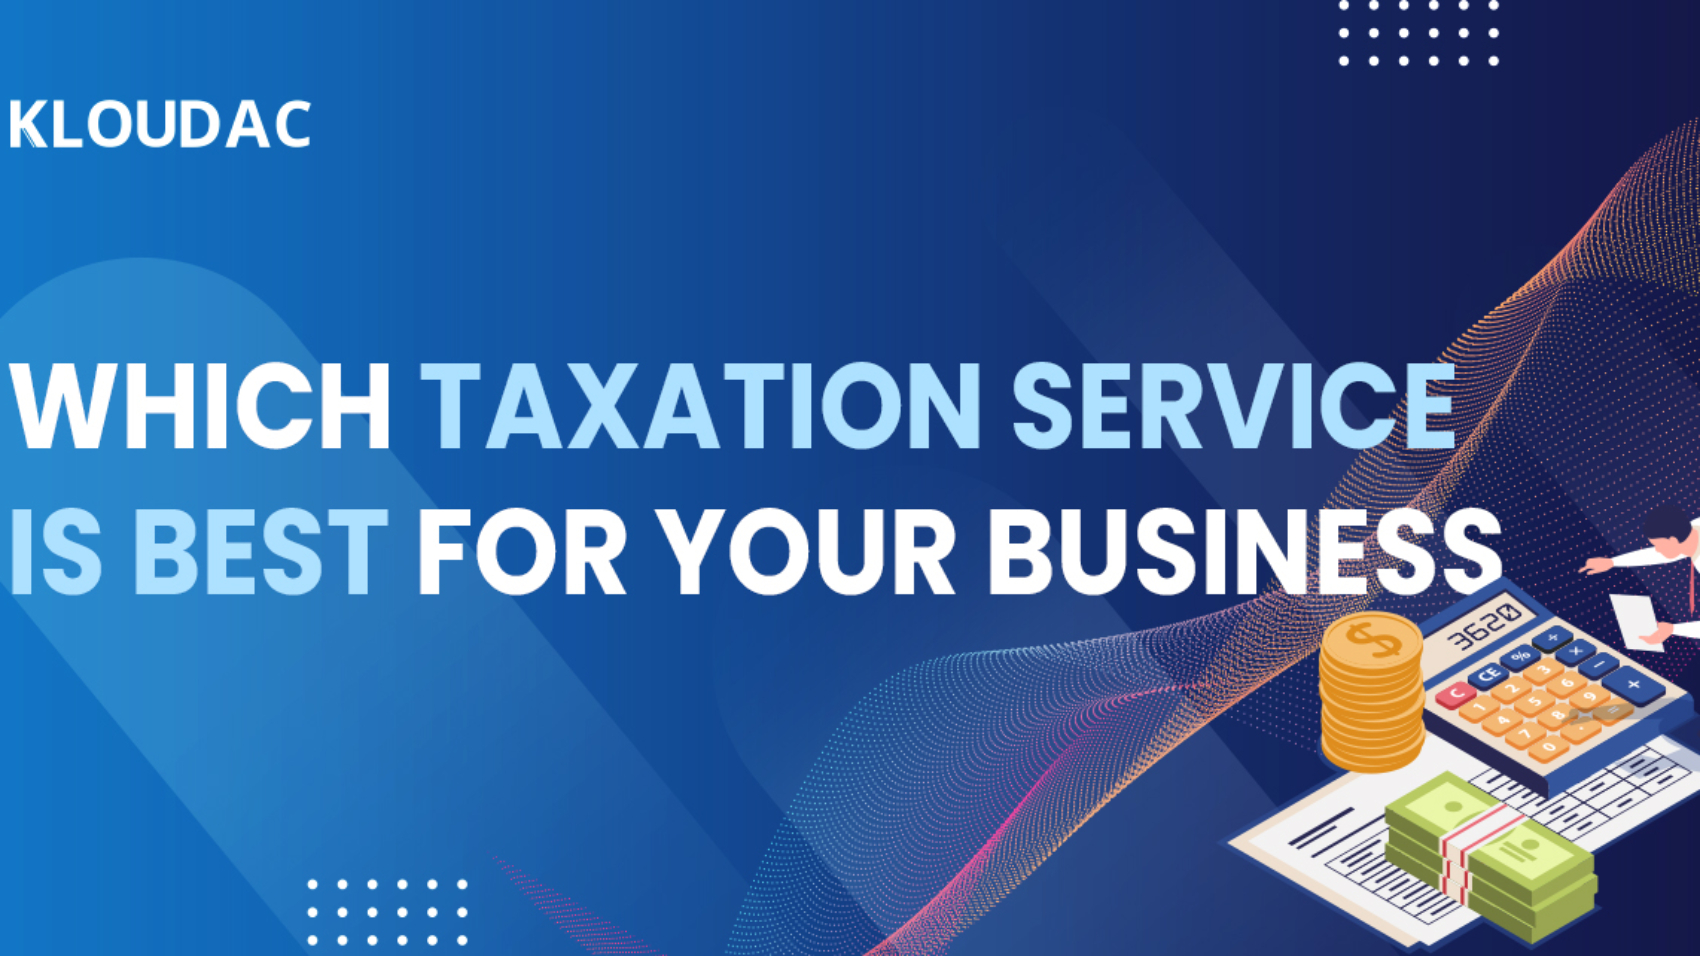 Which taxation service is best for your business